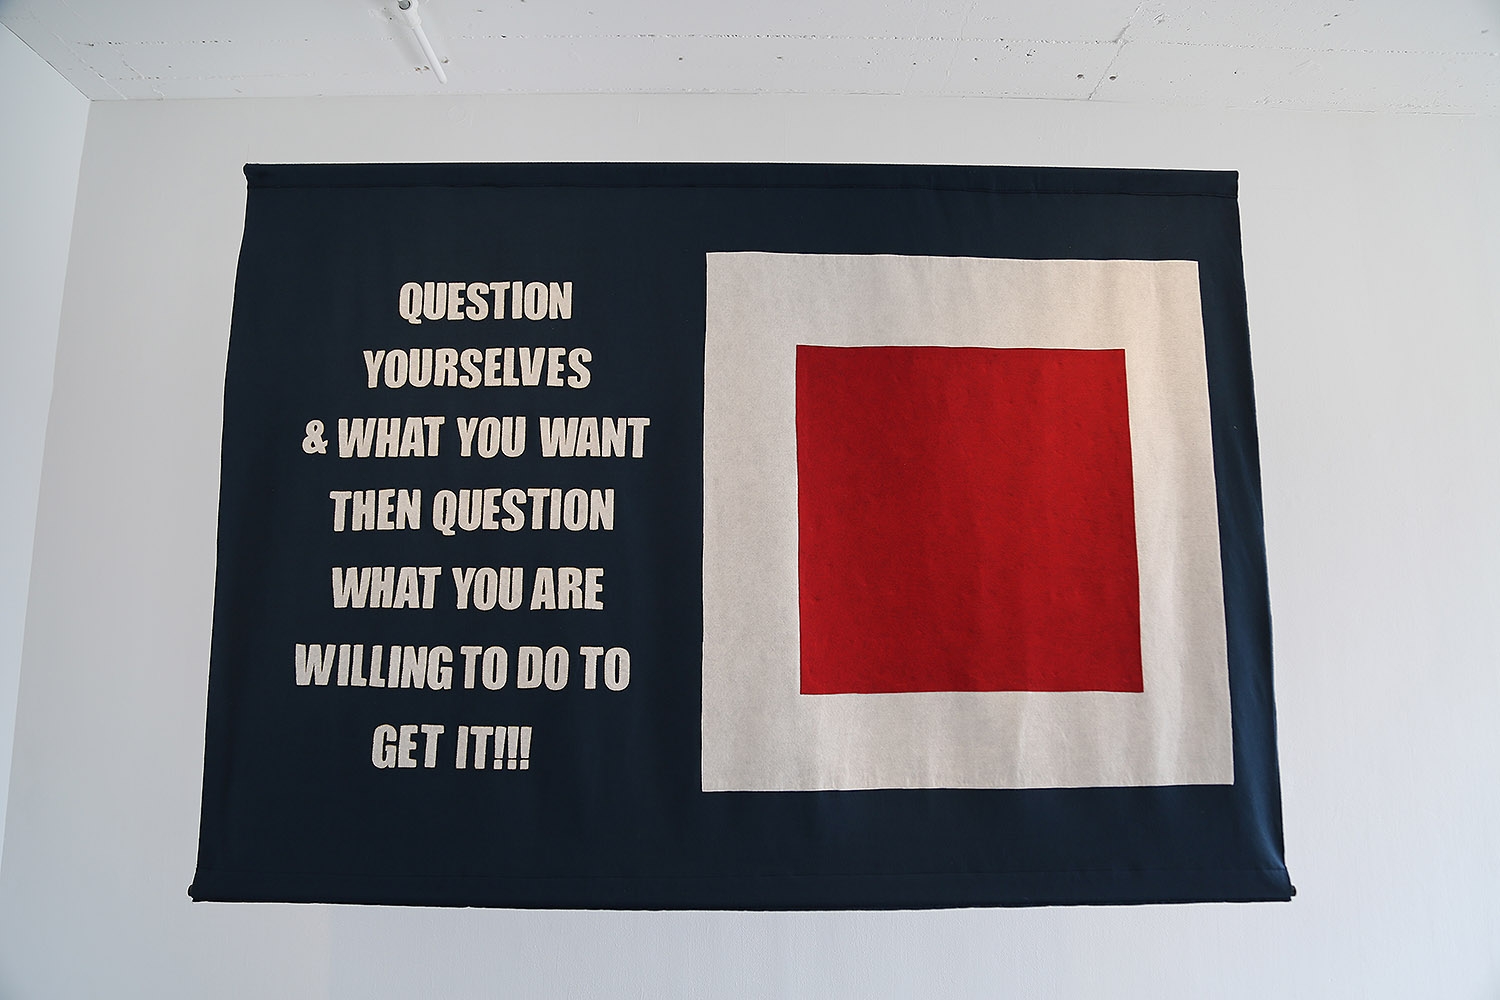 A banner on display in the "Word on the Street" exhibition at Artpace.